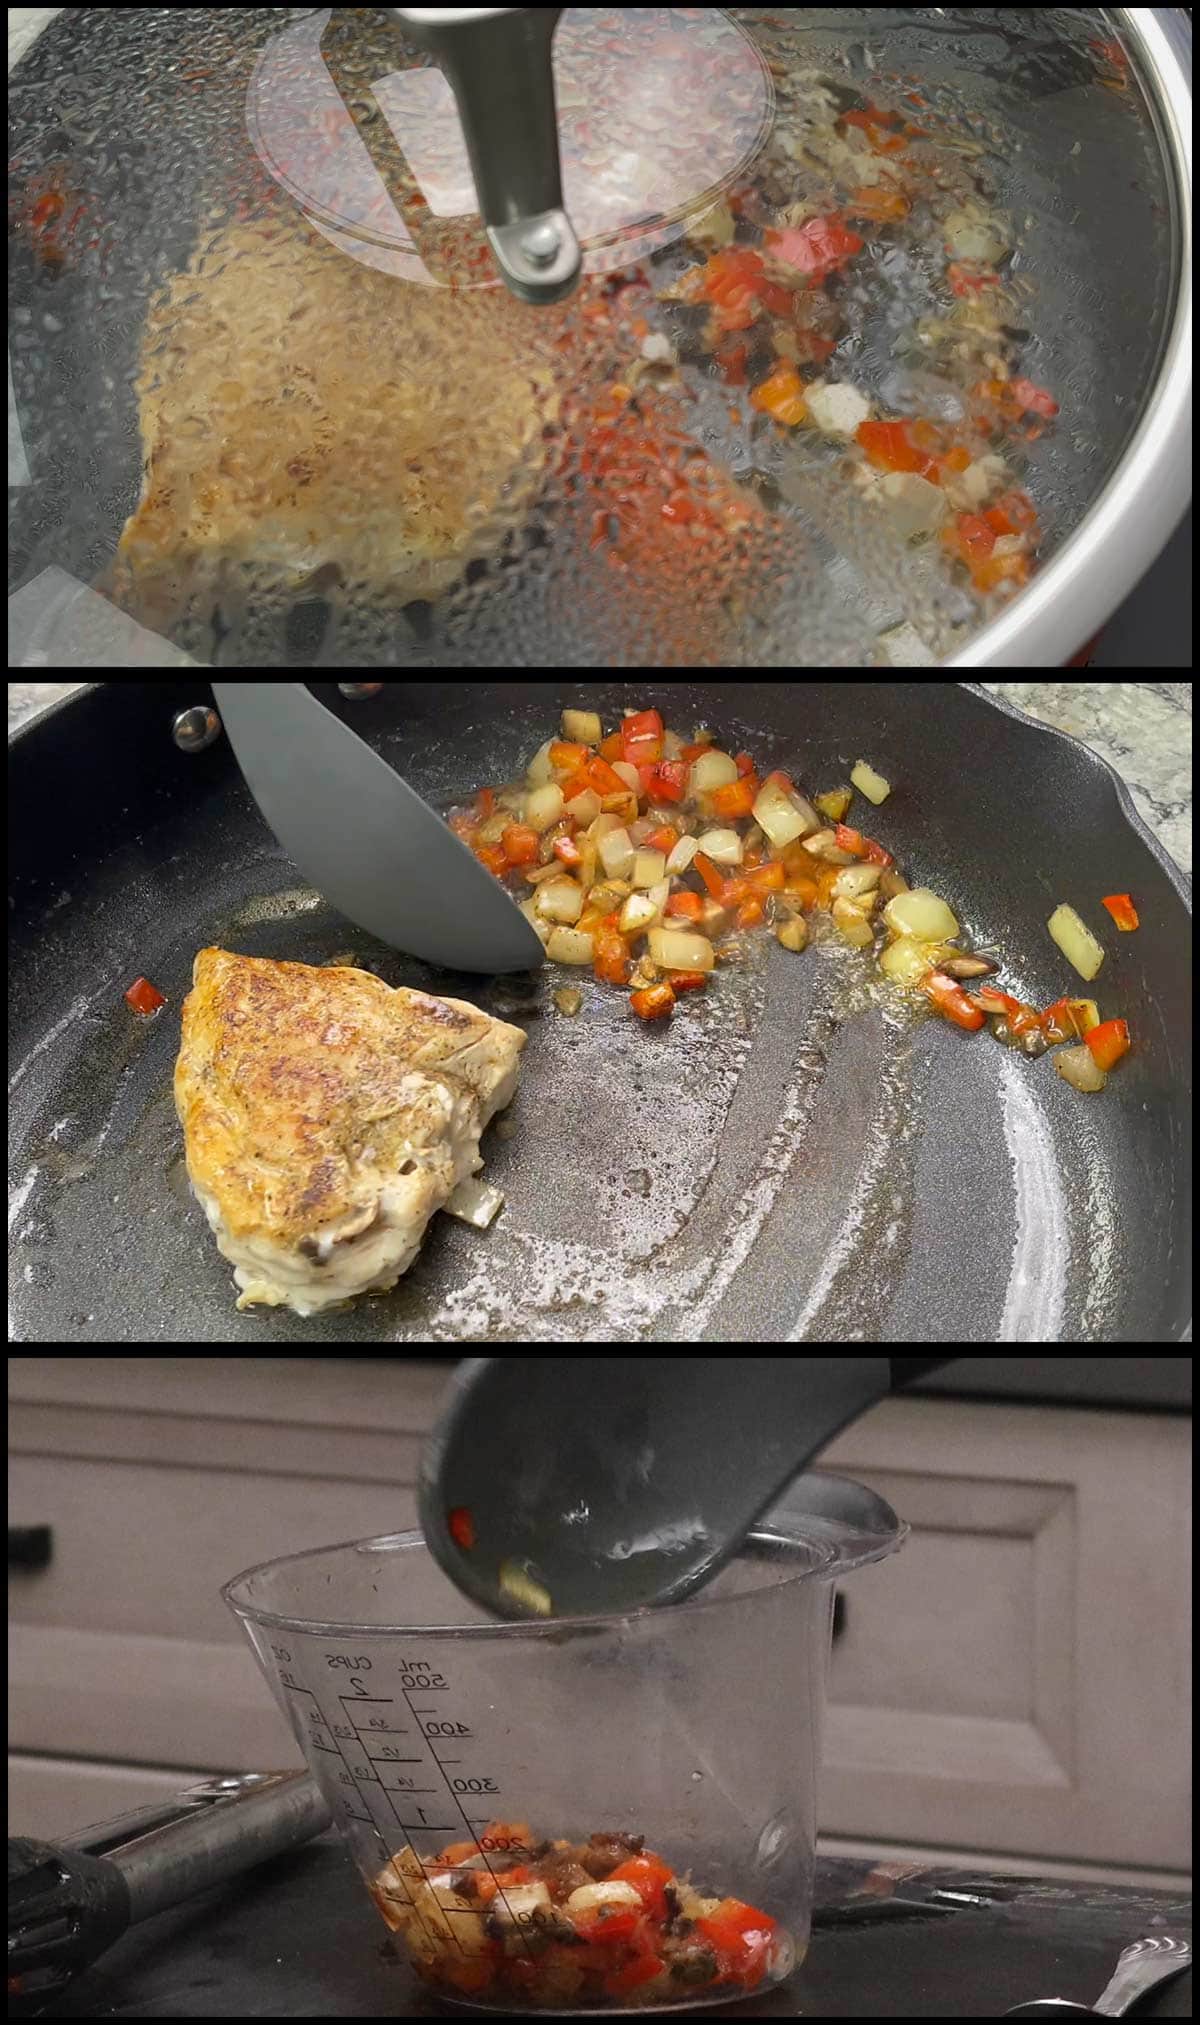 removing cooked vegetables from pan.